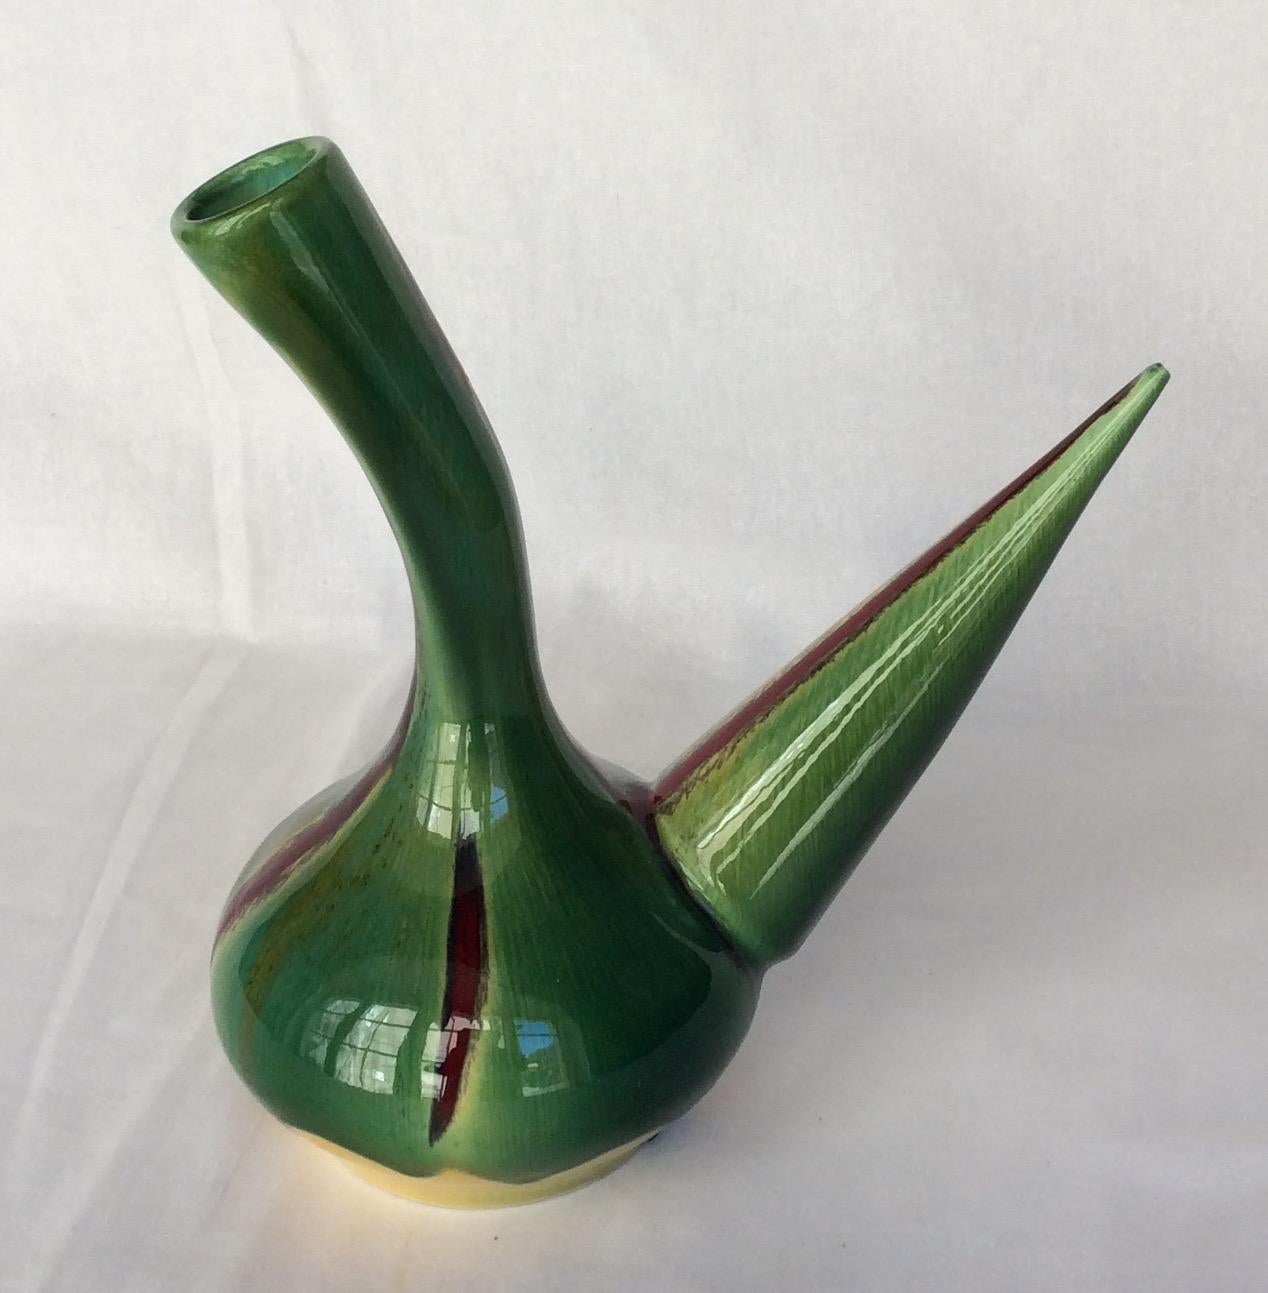 Stunning Midcentury Vessel from Perpignan France, Green Yellow Red and Black In Good Condition For Sale In Miami, FL